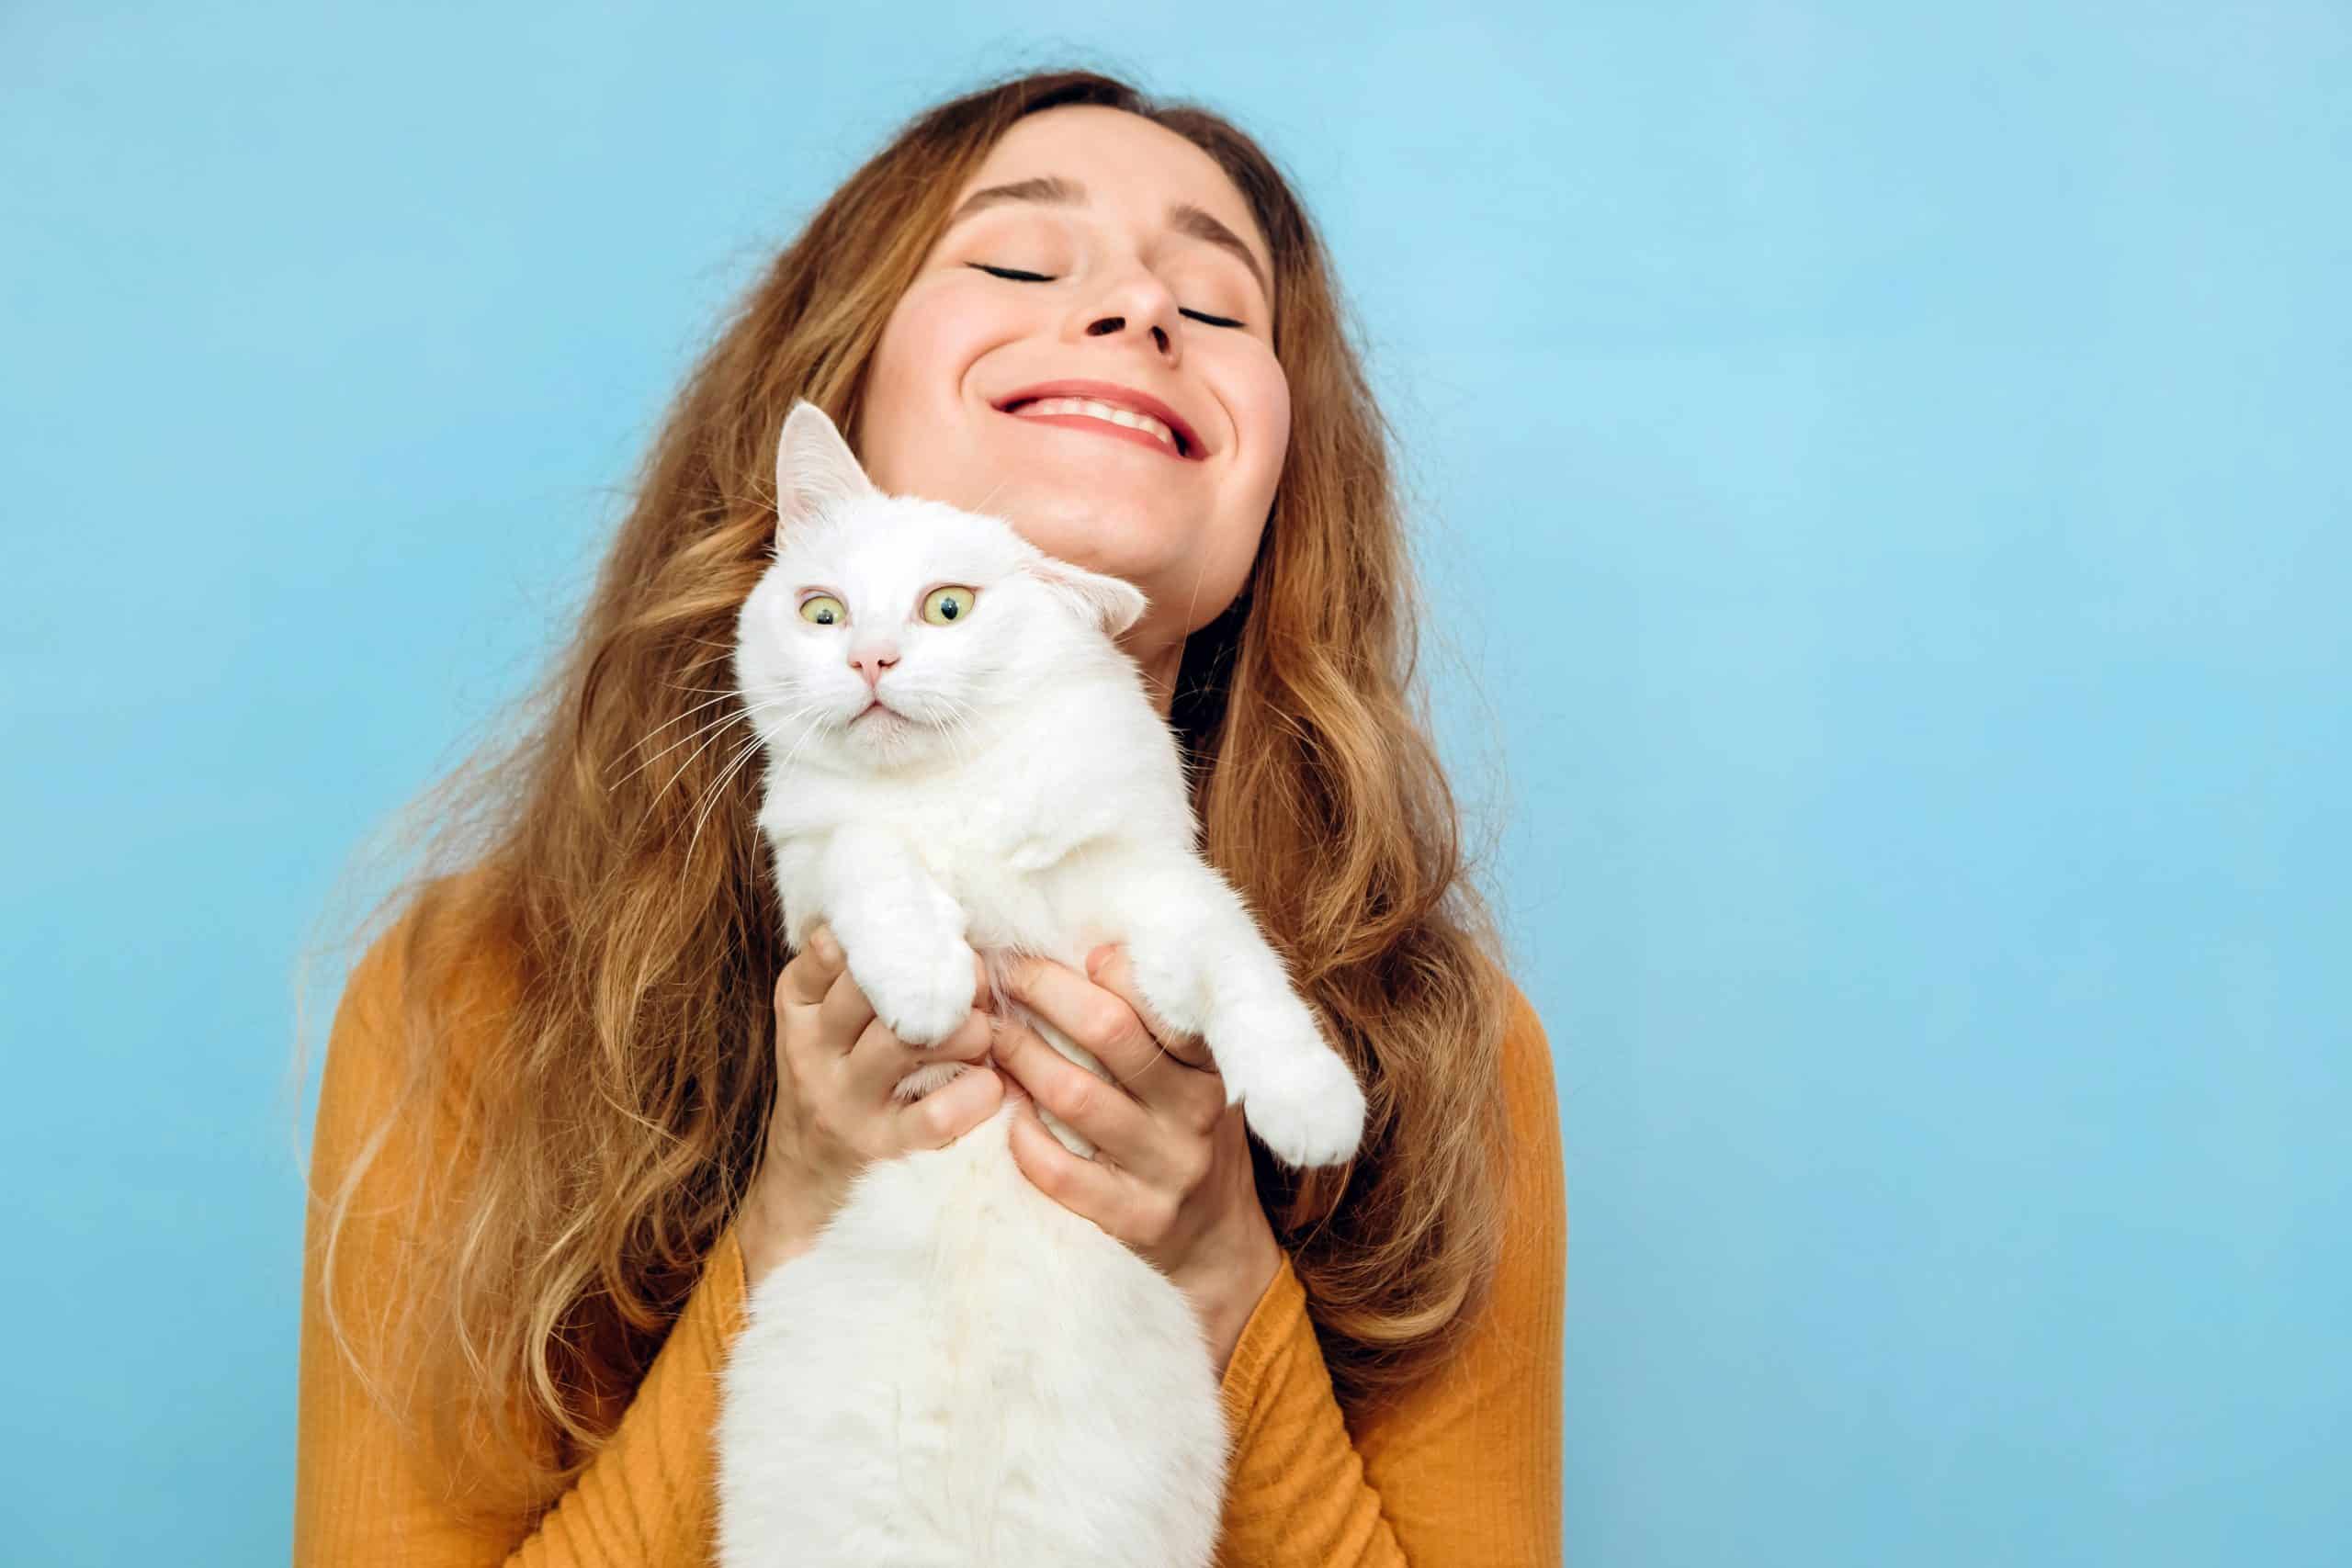 A young girl is holding a white cat in her arms